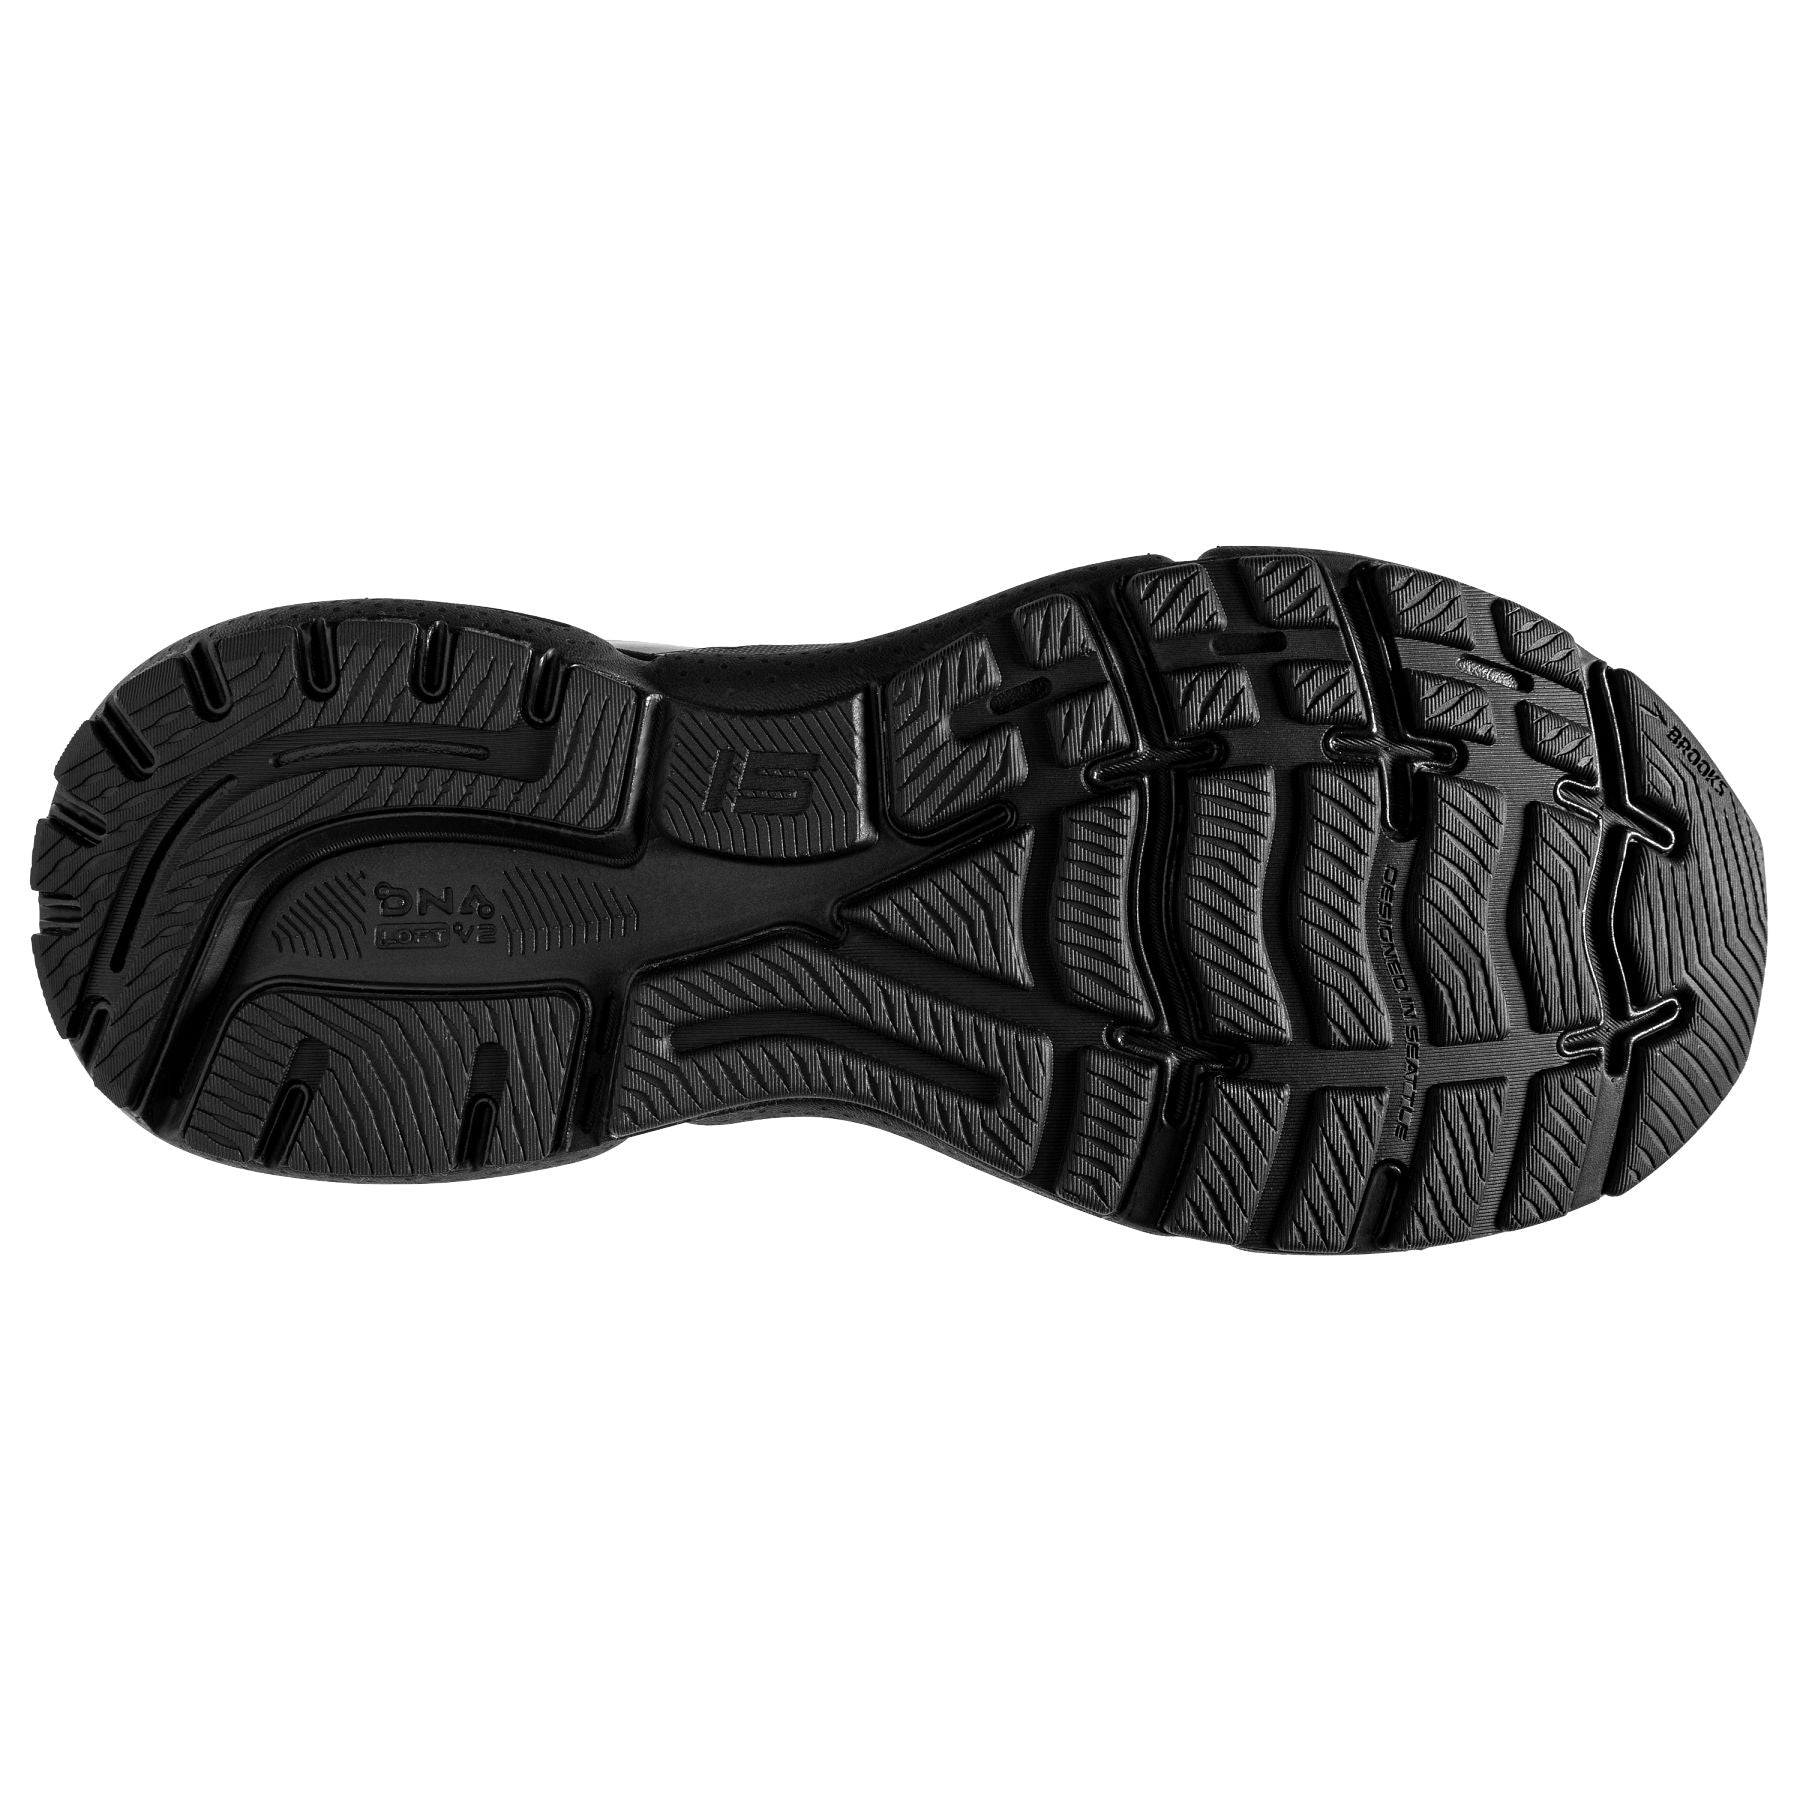 Bottom (outer sole) view of the Women's Ghost 15 in Black/Black/Ebony